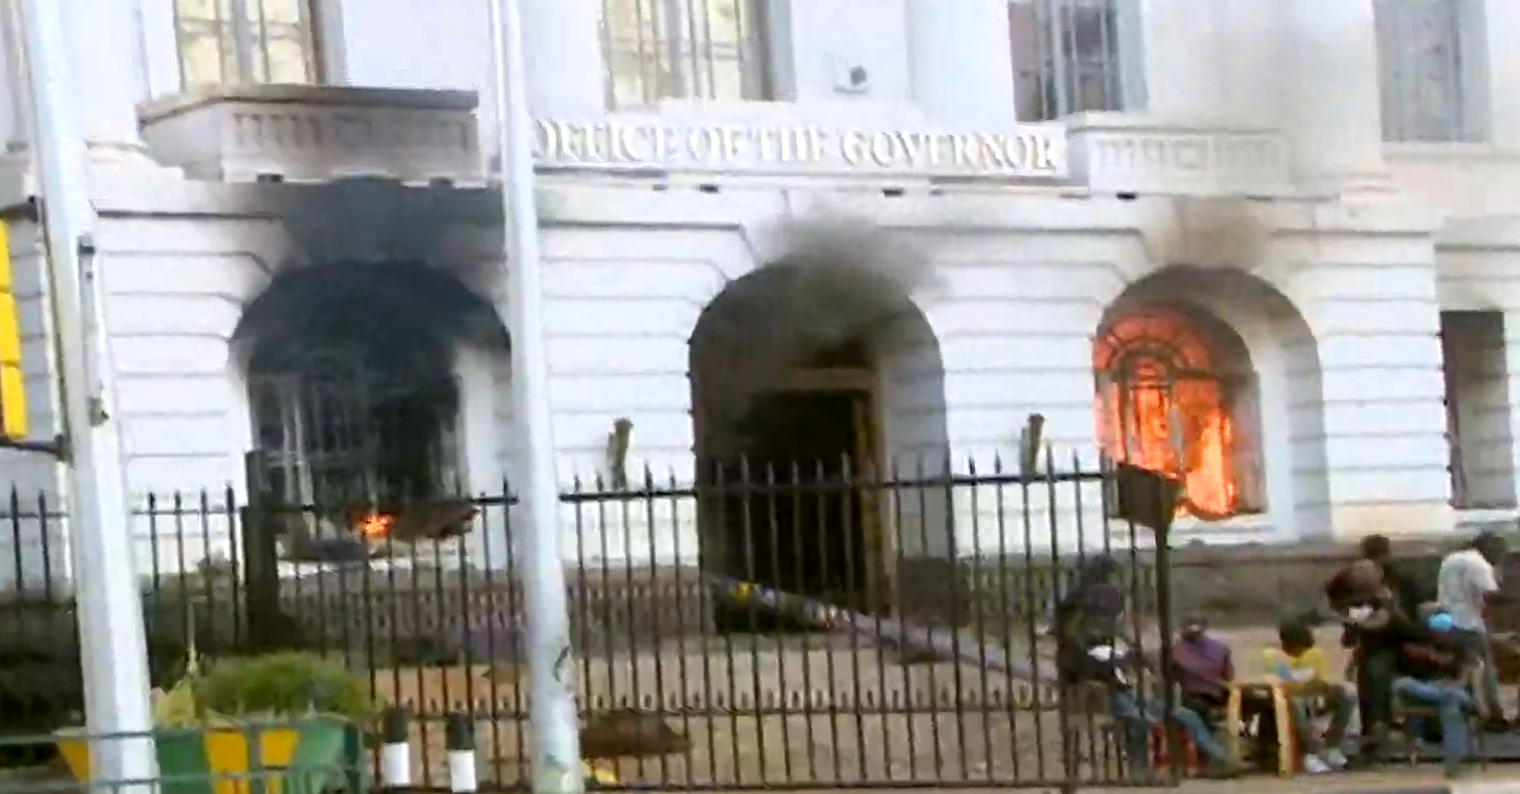 A screengrab image of City Hall on fire.